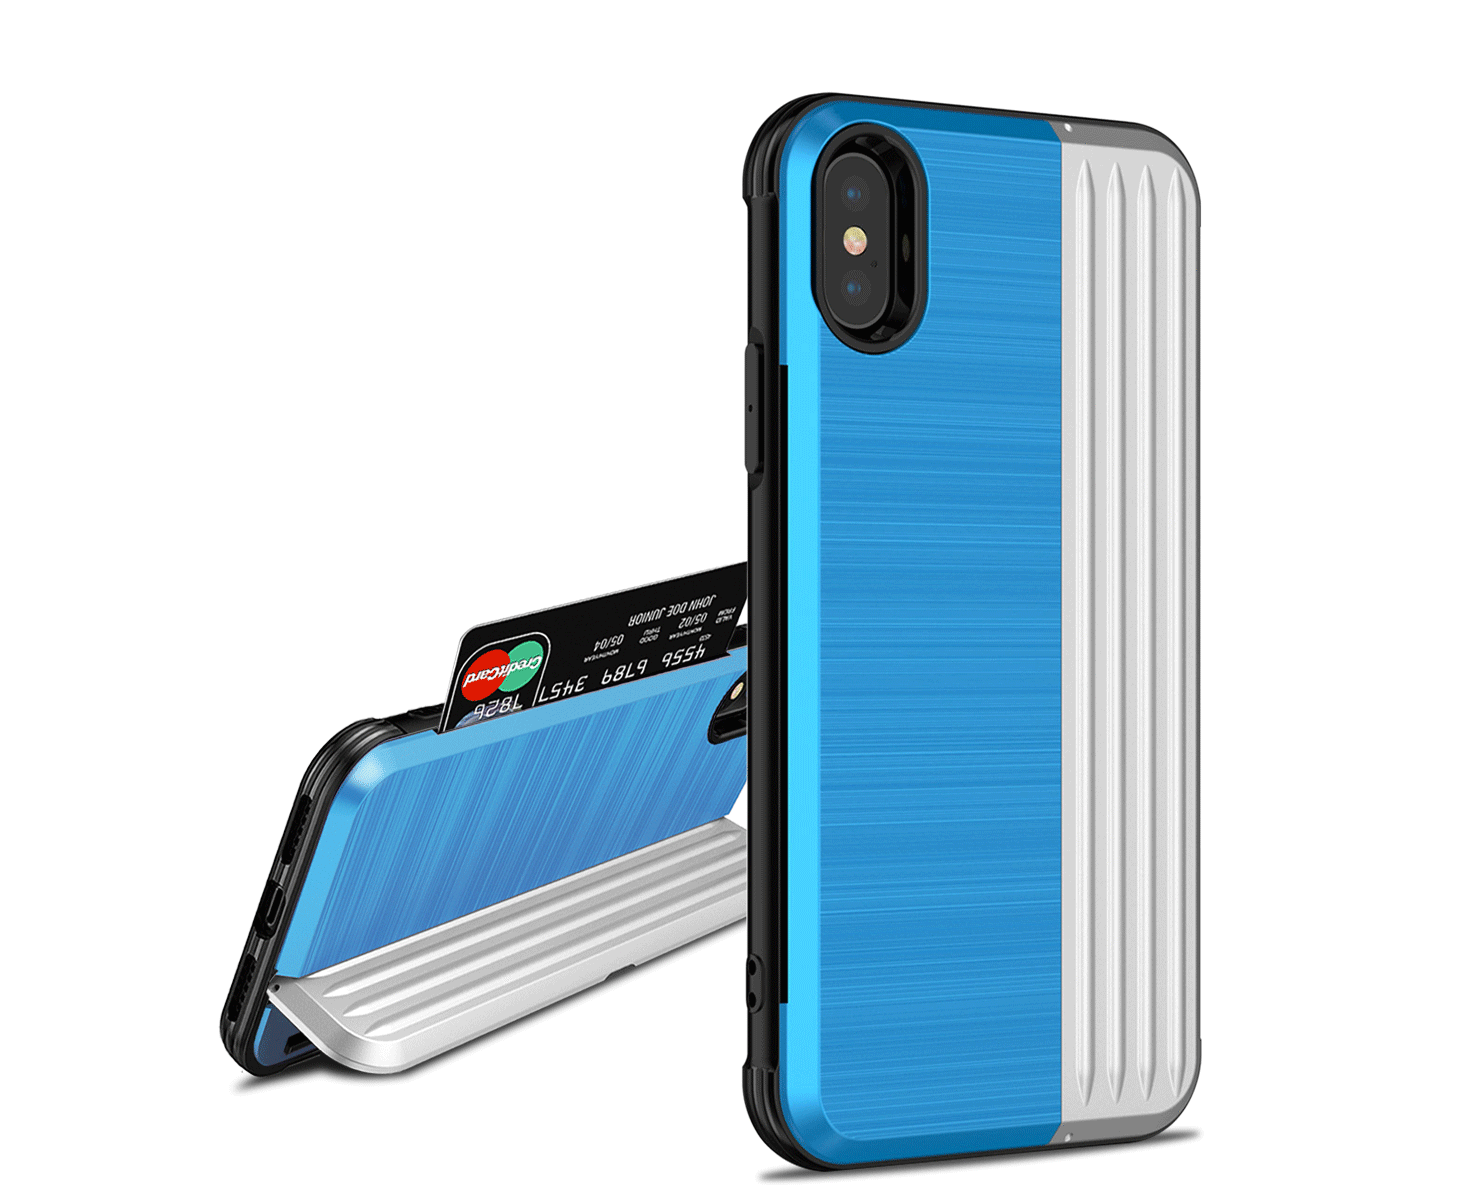 iPhone X/XS Case Card Holder Kickstand Dual Layer Heavy Duty Cover - Sky-Blue/Silver